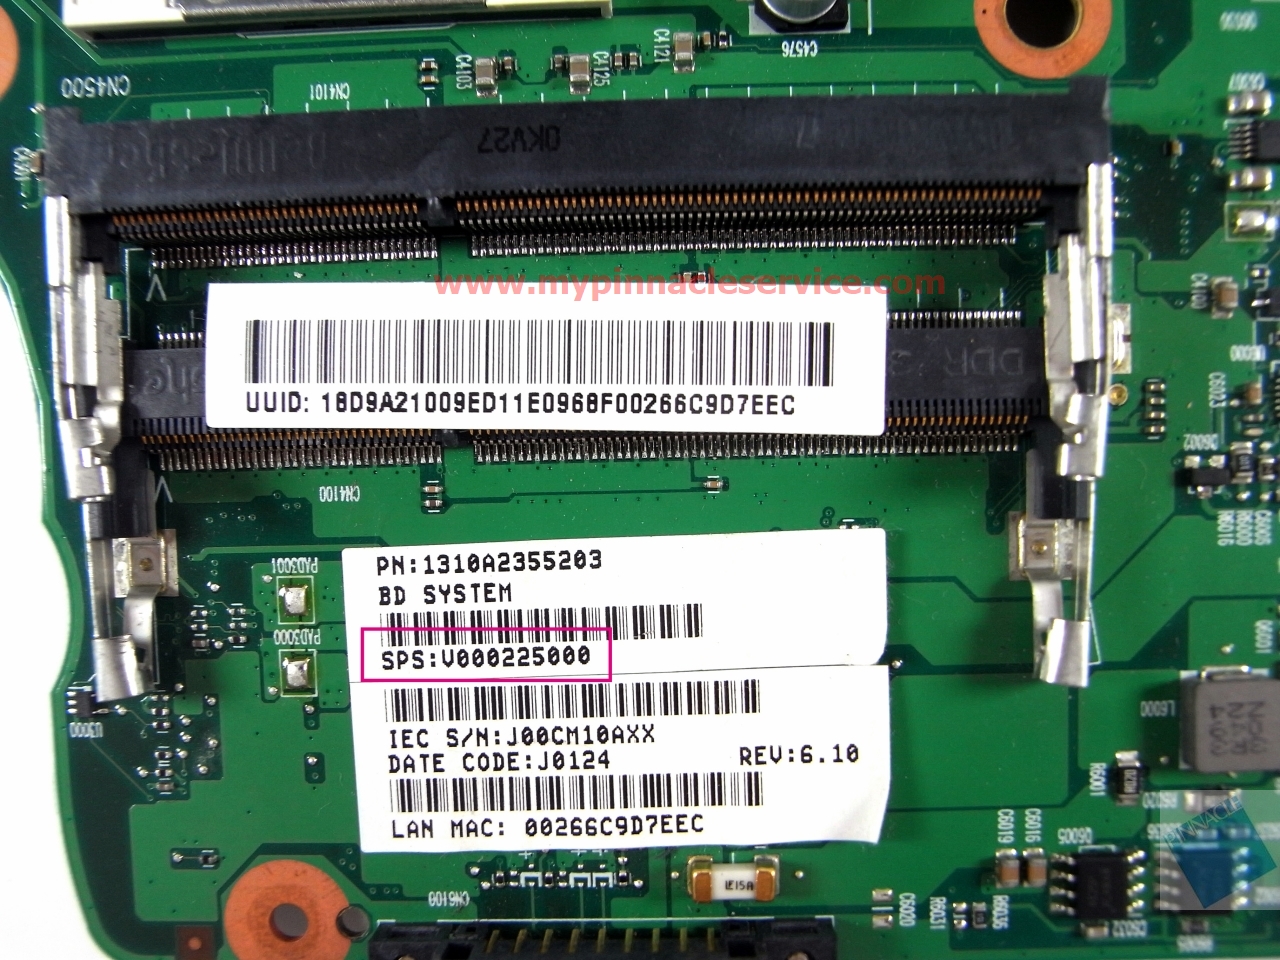 v000225000-motherboard-for-toshiba-satellite-c650-c655-6050a2355202-1310a2355203-r0011256.jpg